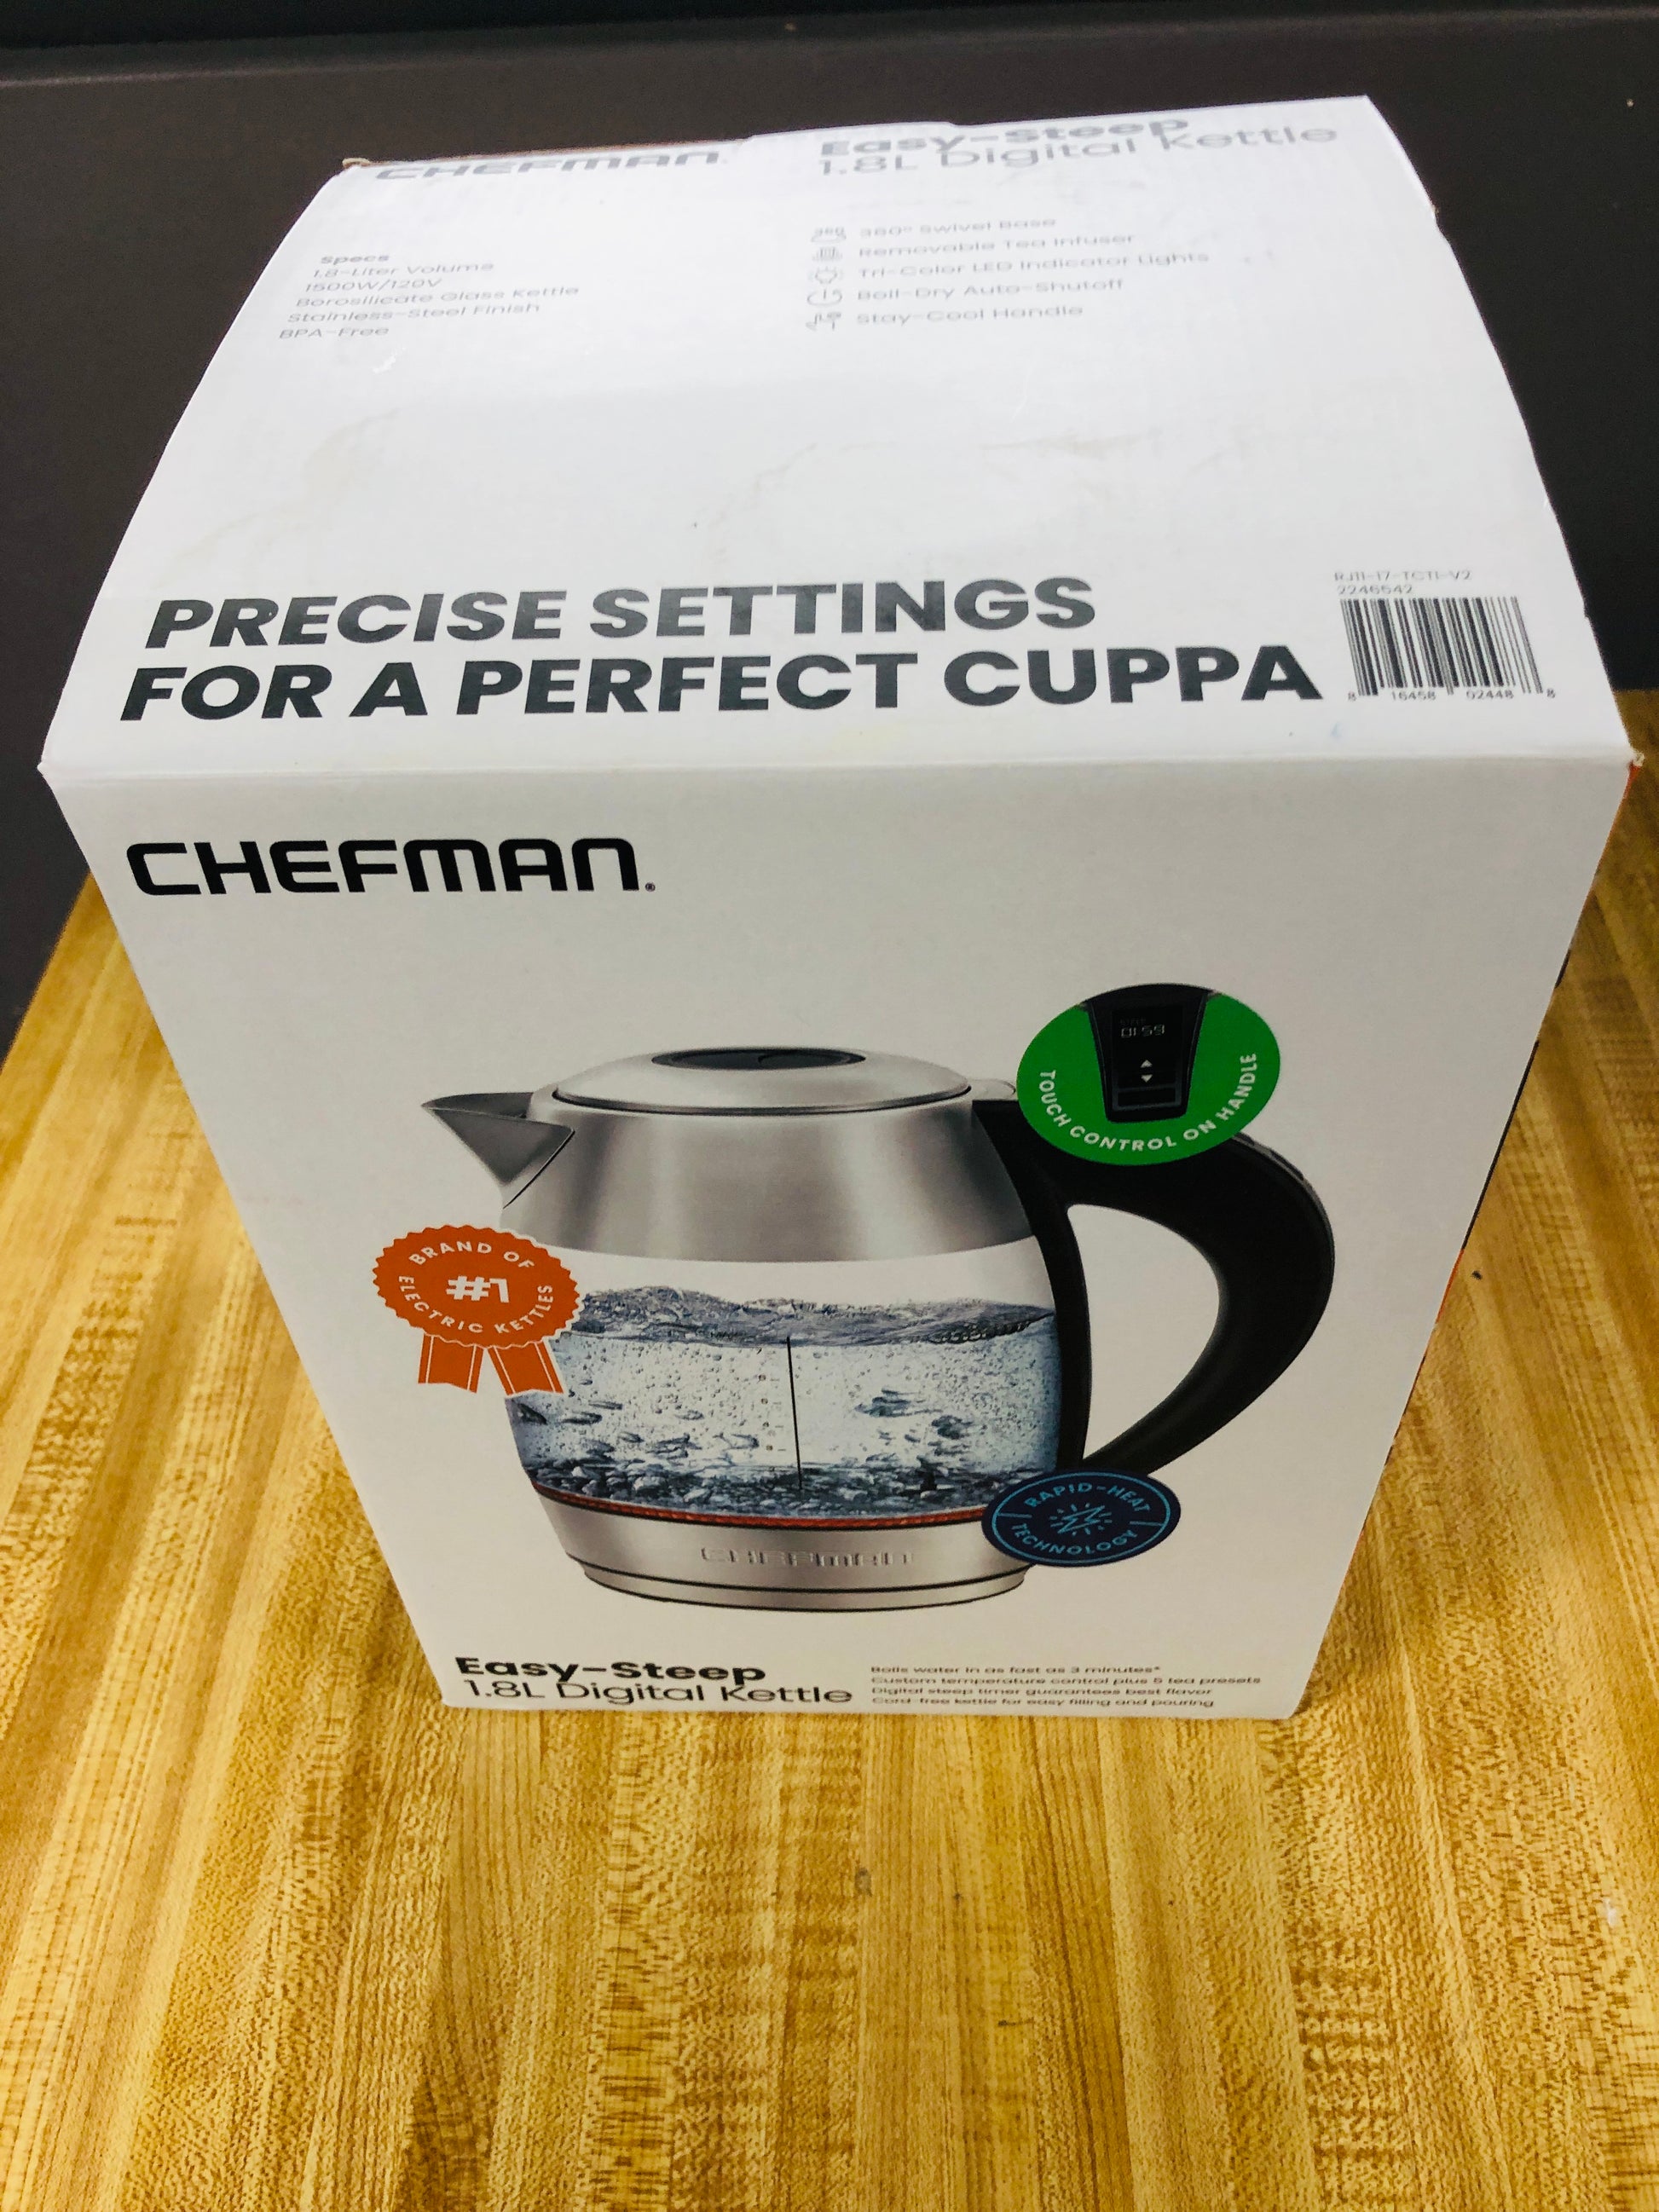 As is Chefman 1.8L Digital Precision Electric Kettle with Tea